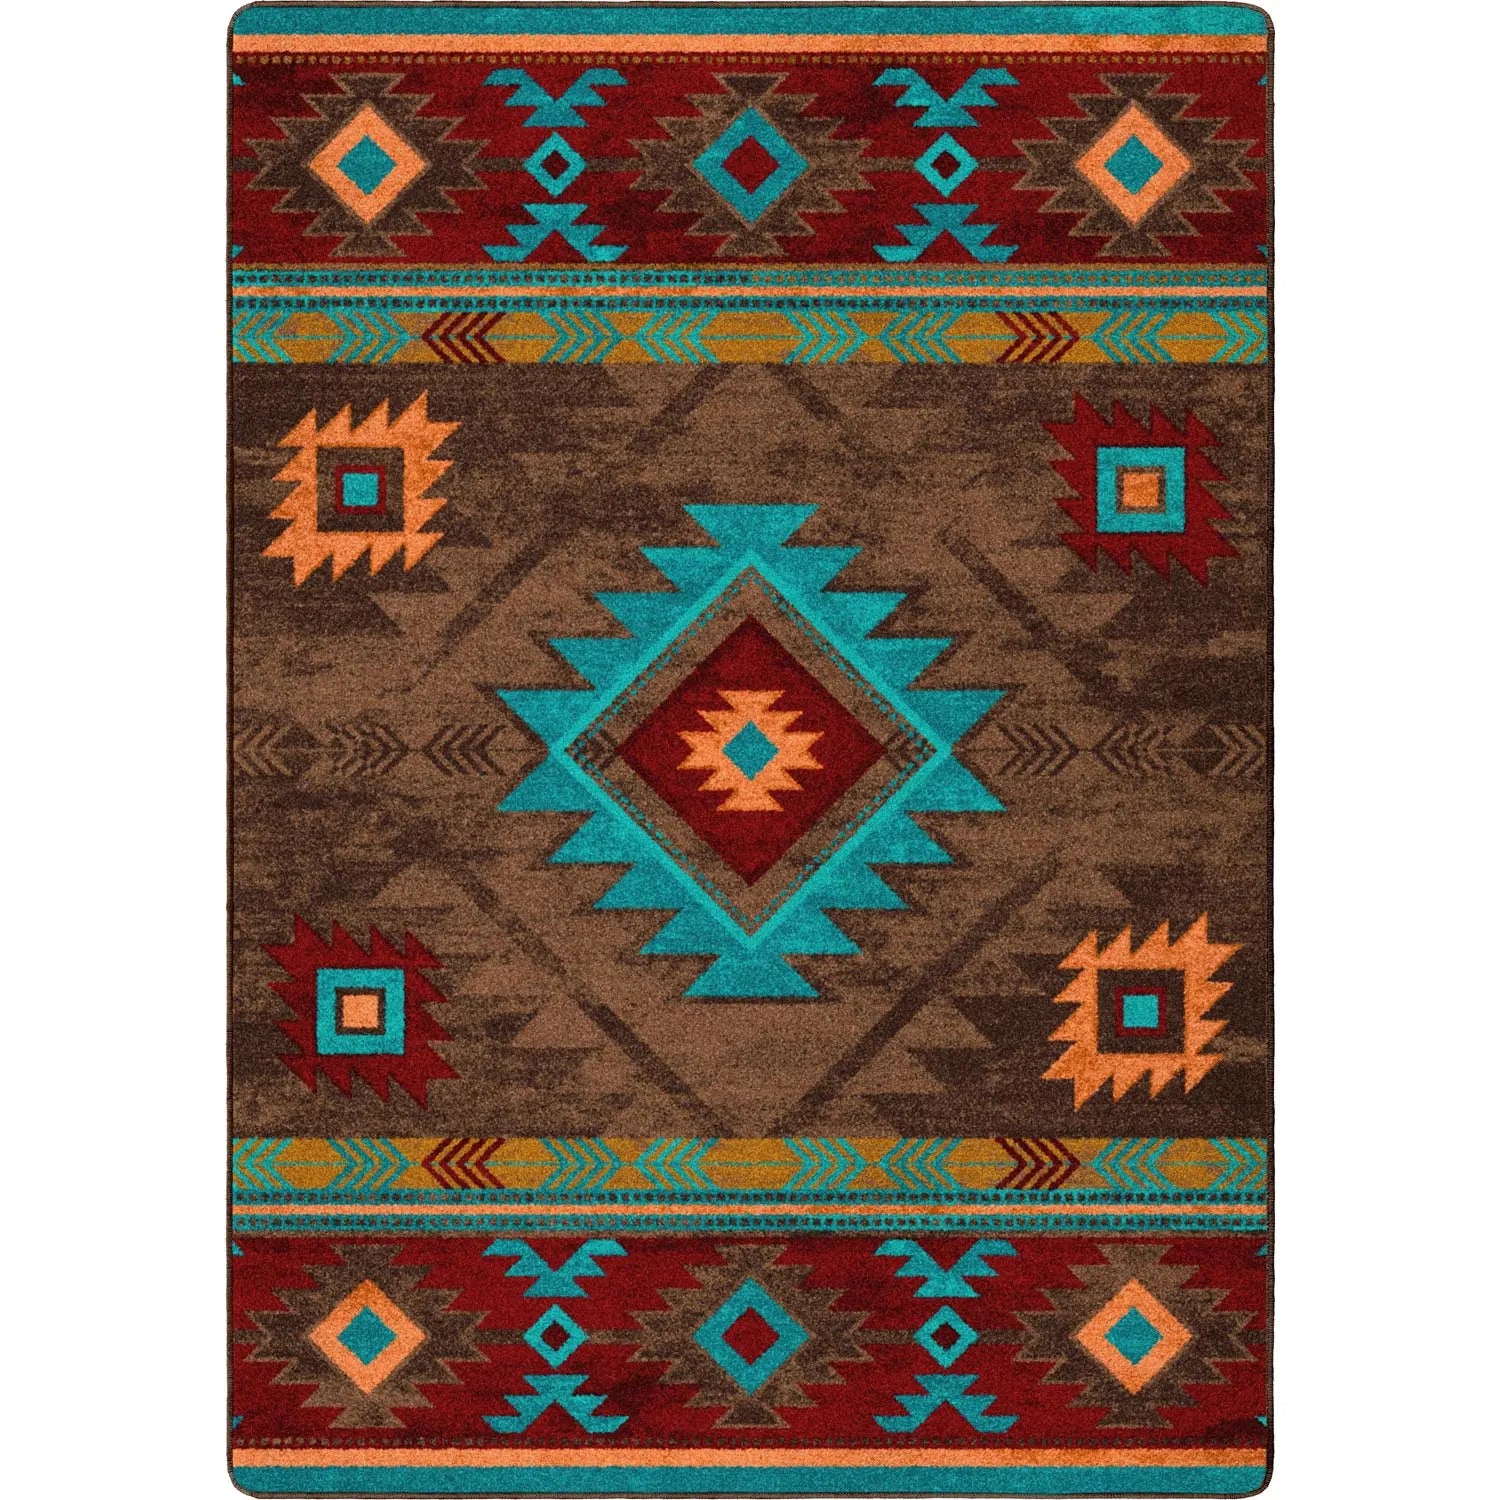 Whisky River Turquoise Rug